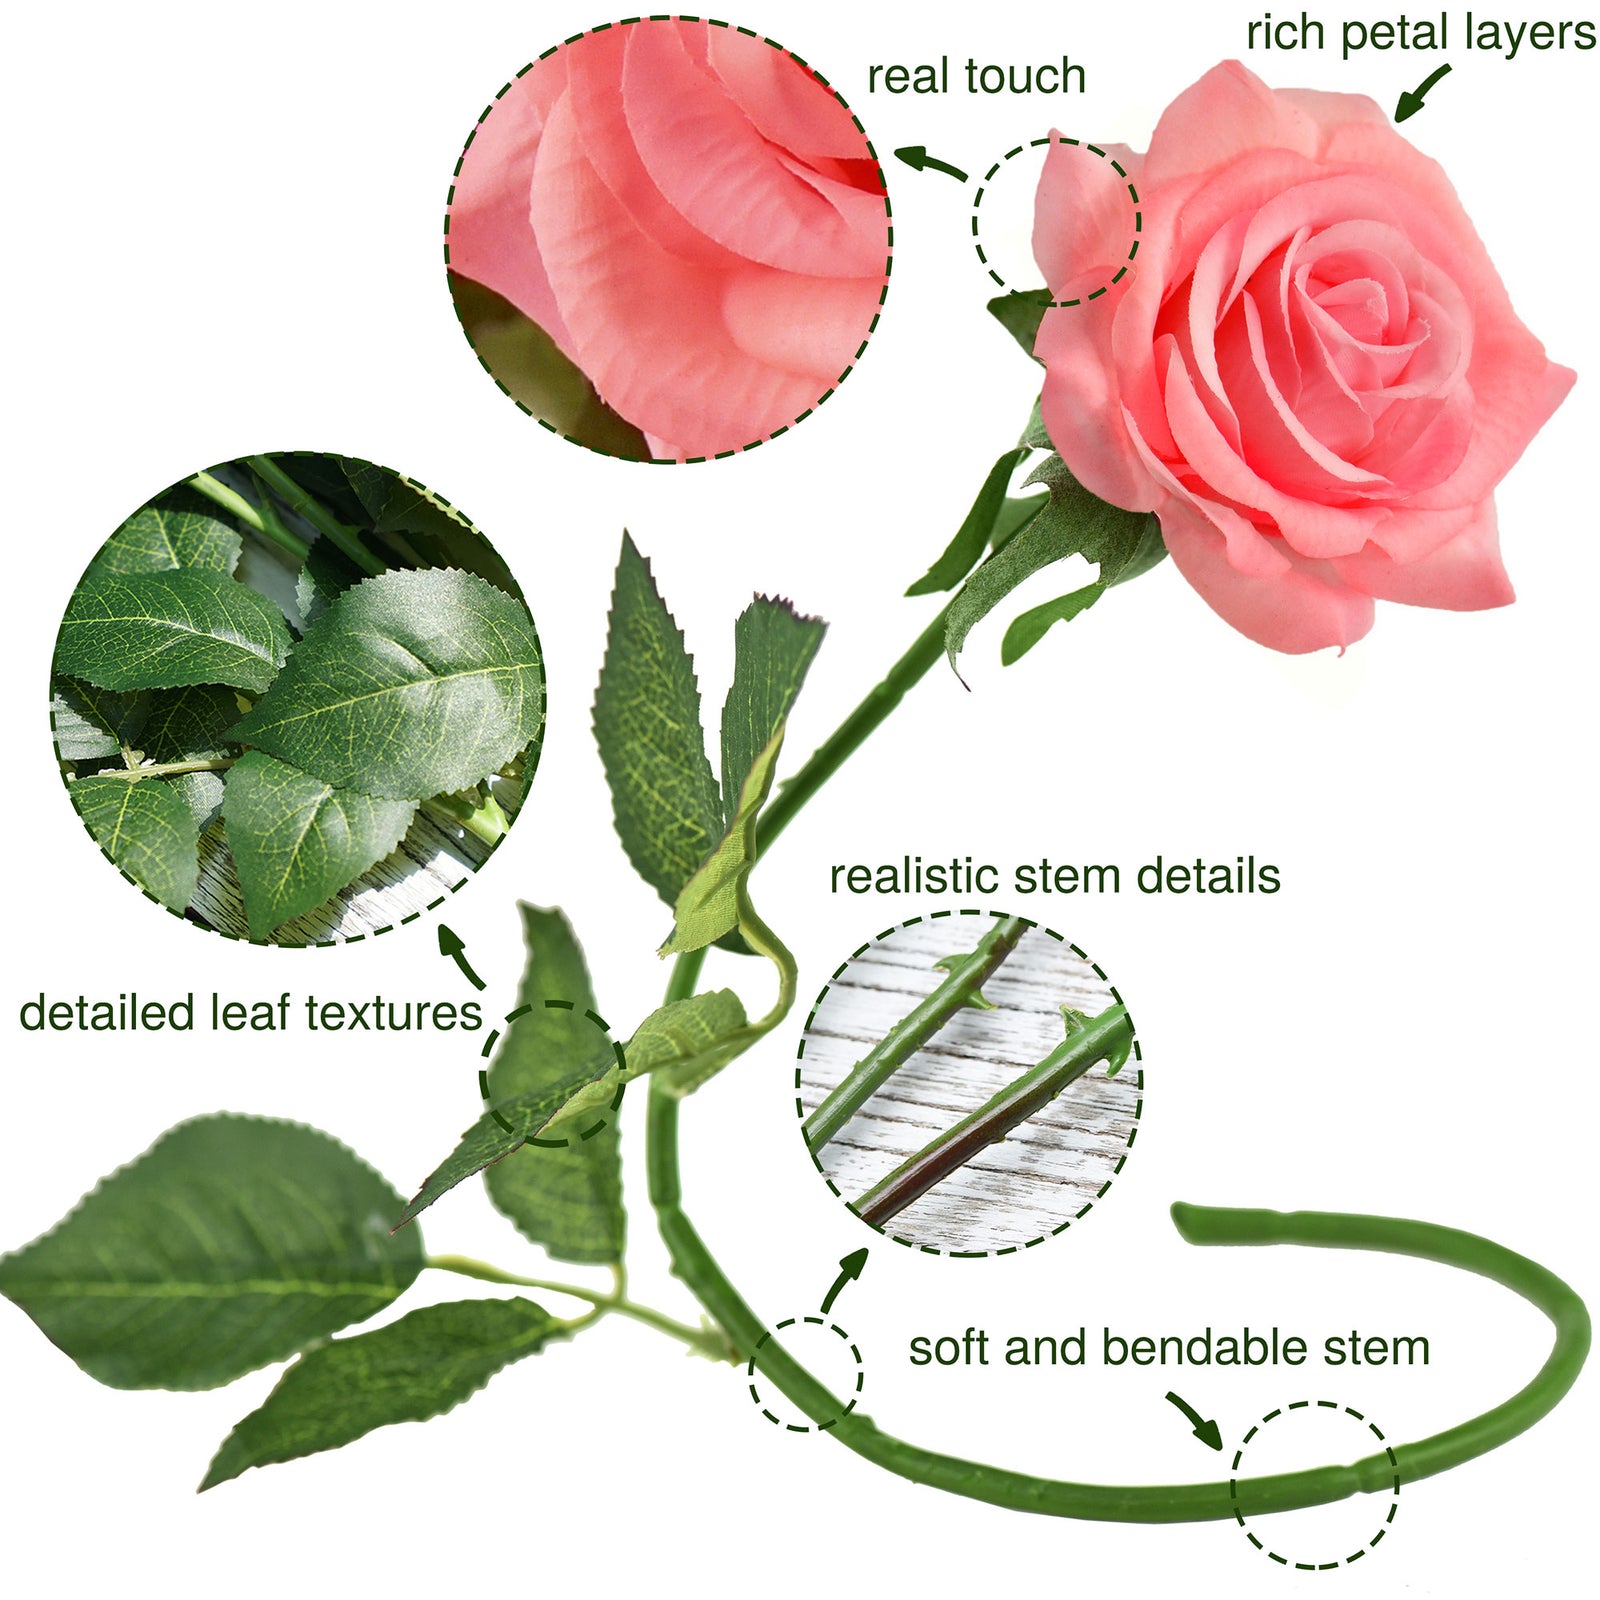 Pinkish Real Touch Silk Artificial Flowers ‘Petals Feel and Look like Fresh Roses 10 Stems